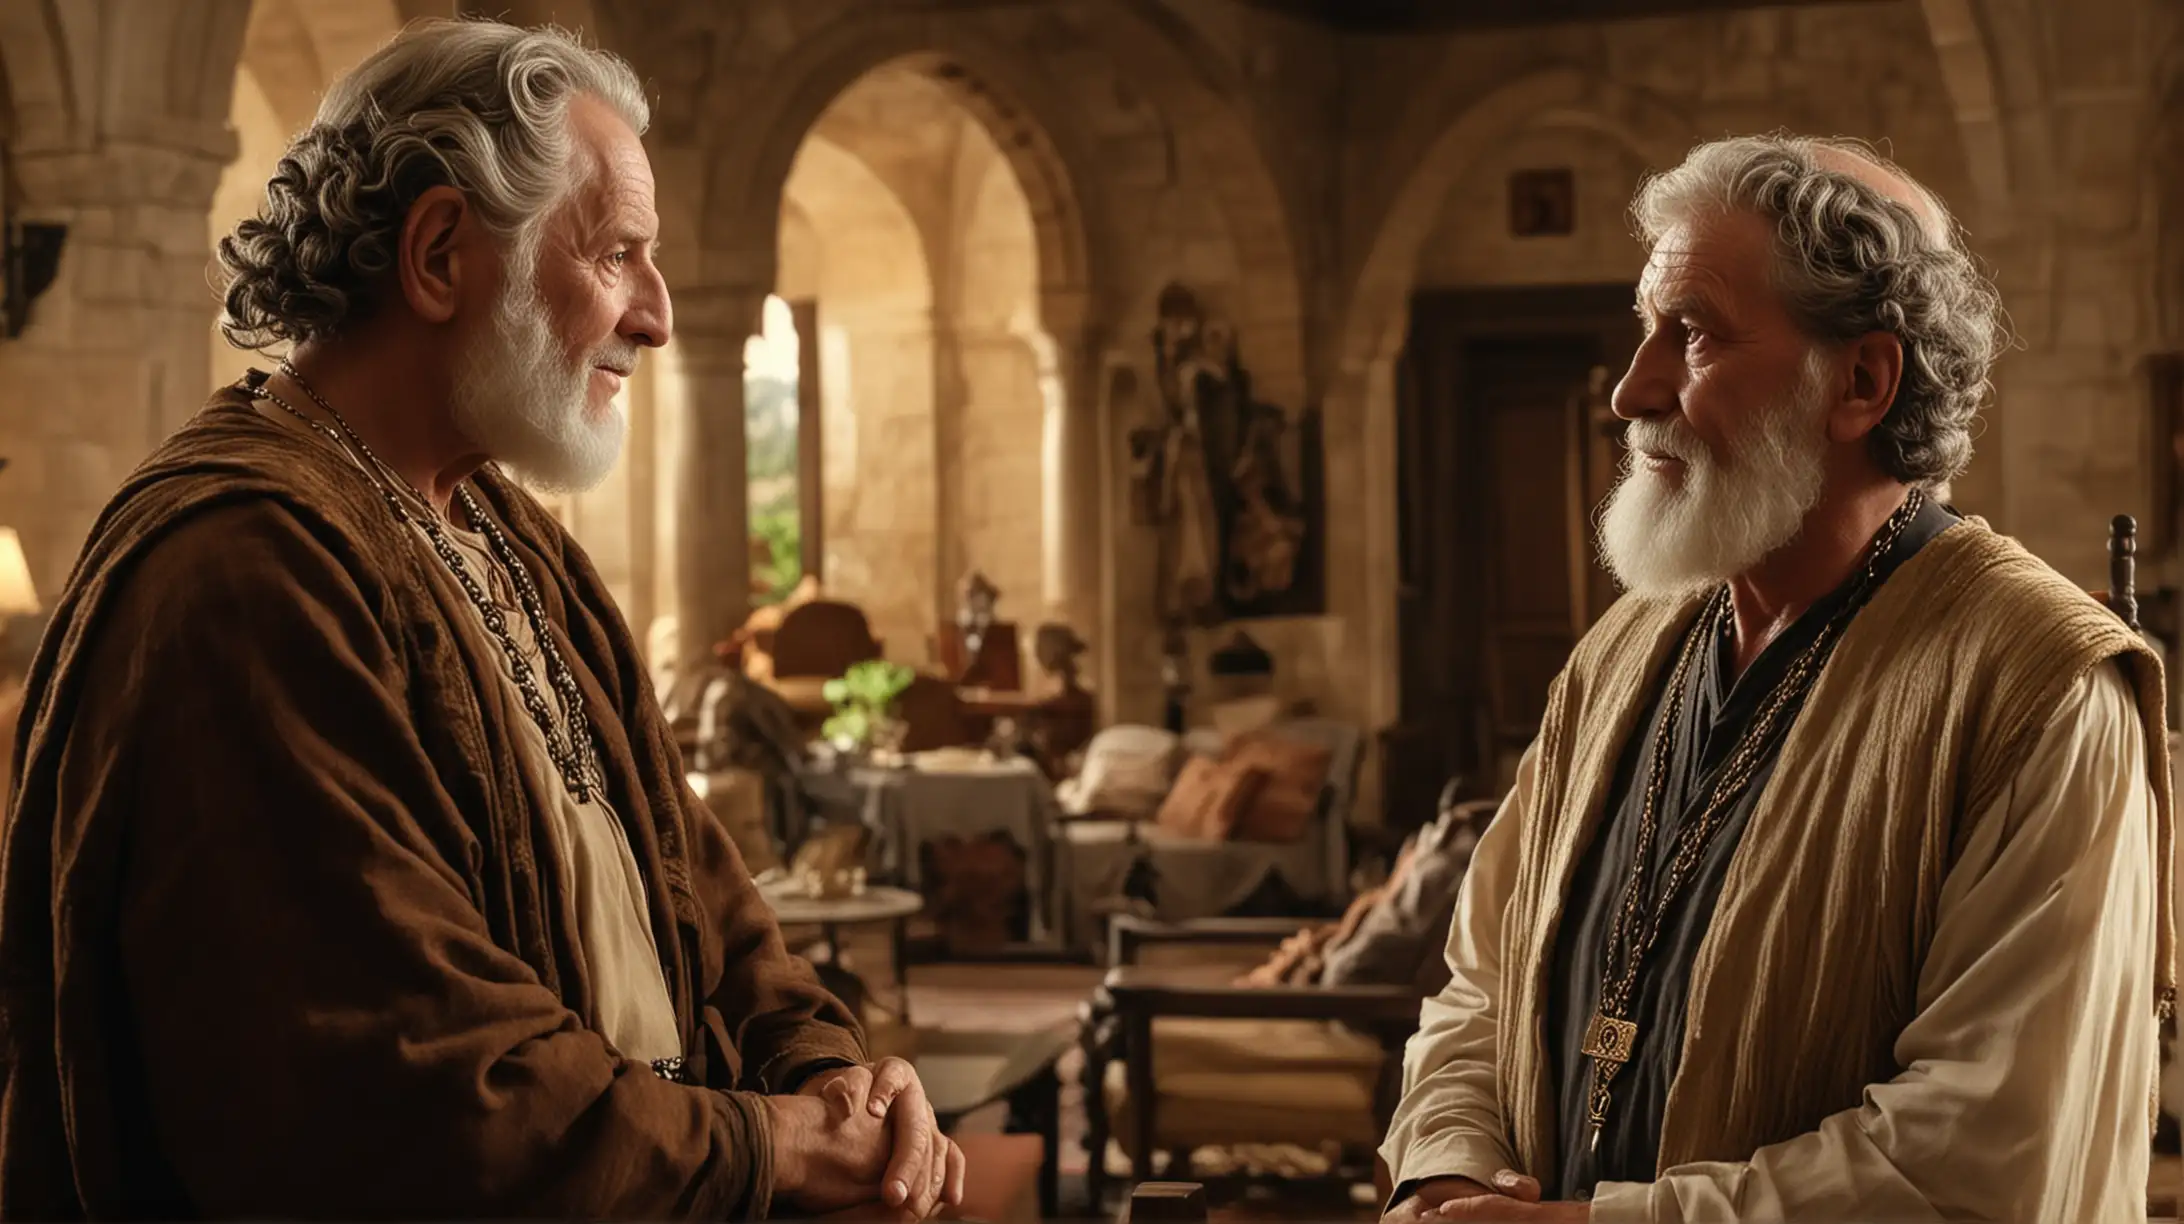 2 old handsome men talking in a luxurious house. During the biblical era of King David.